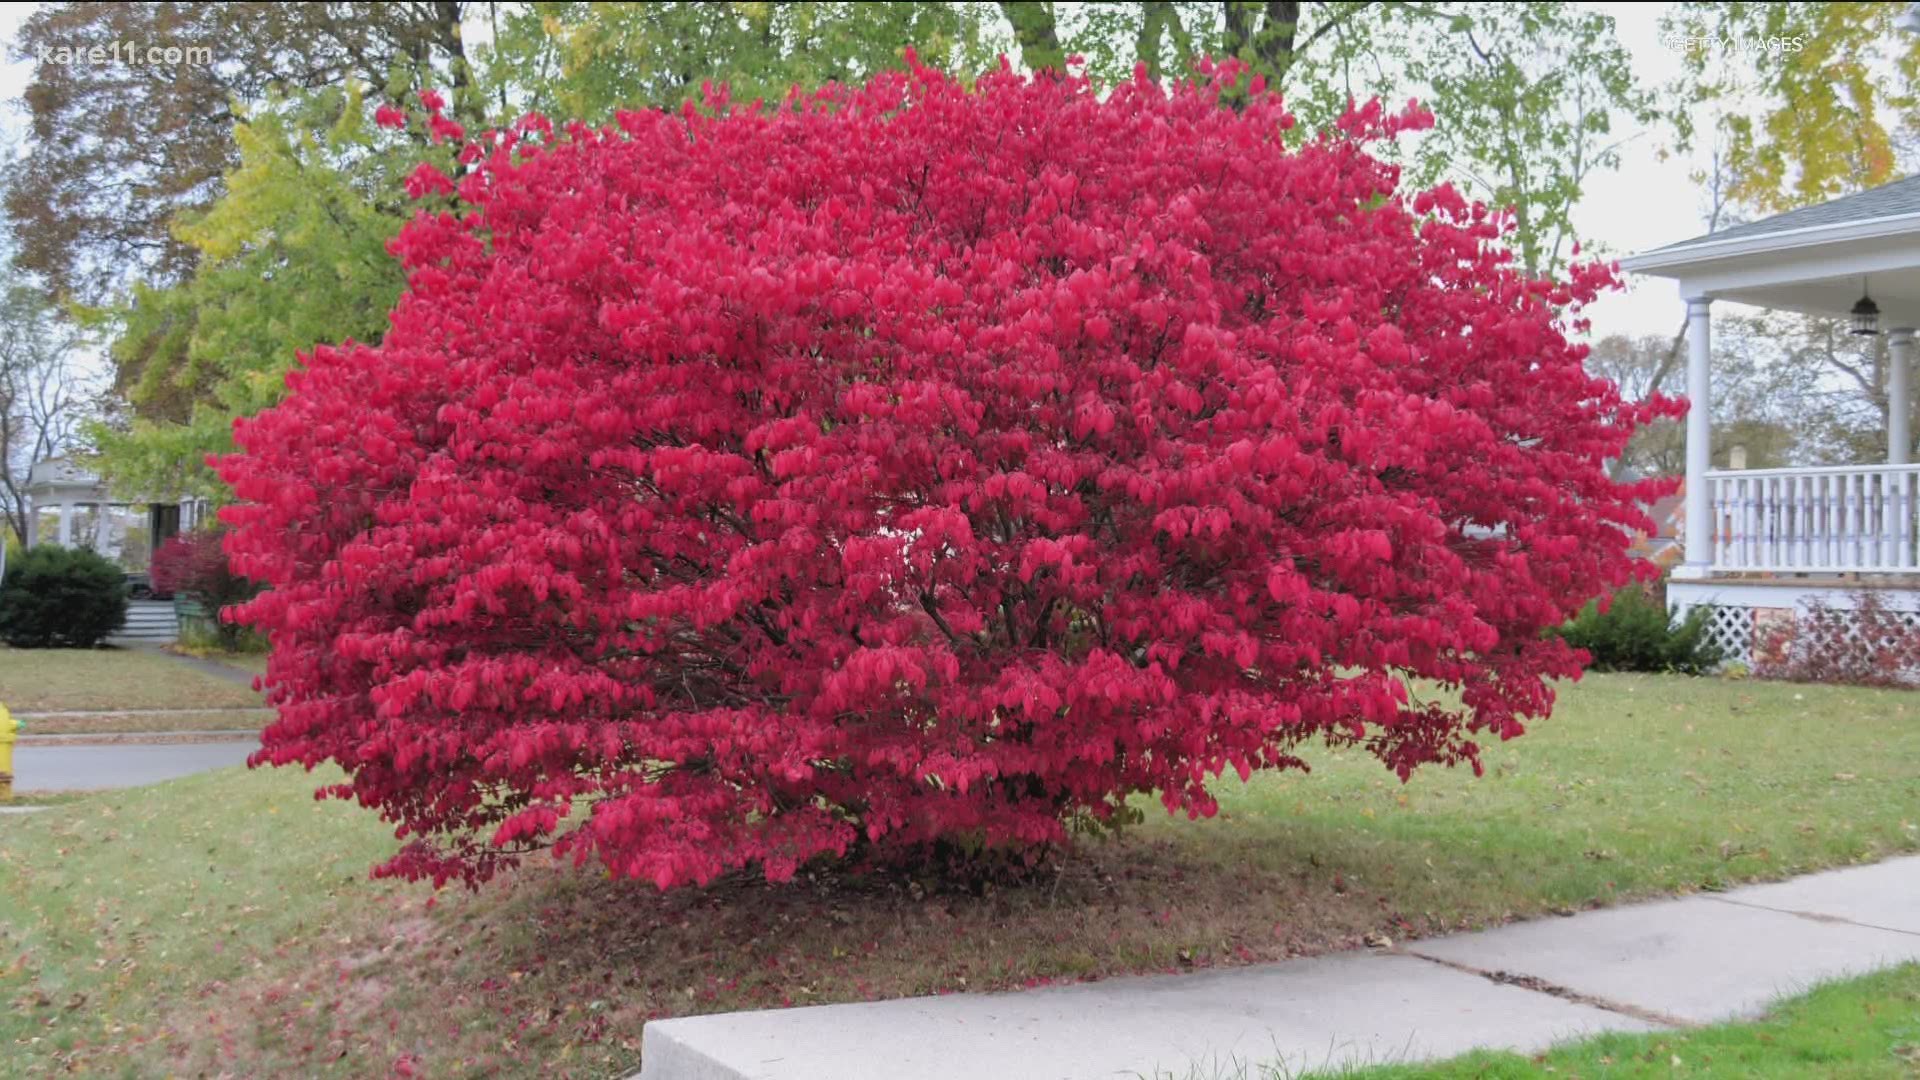 This eye-catching colorful autumn bush is prohibited after 2022